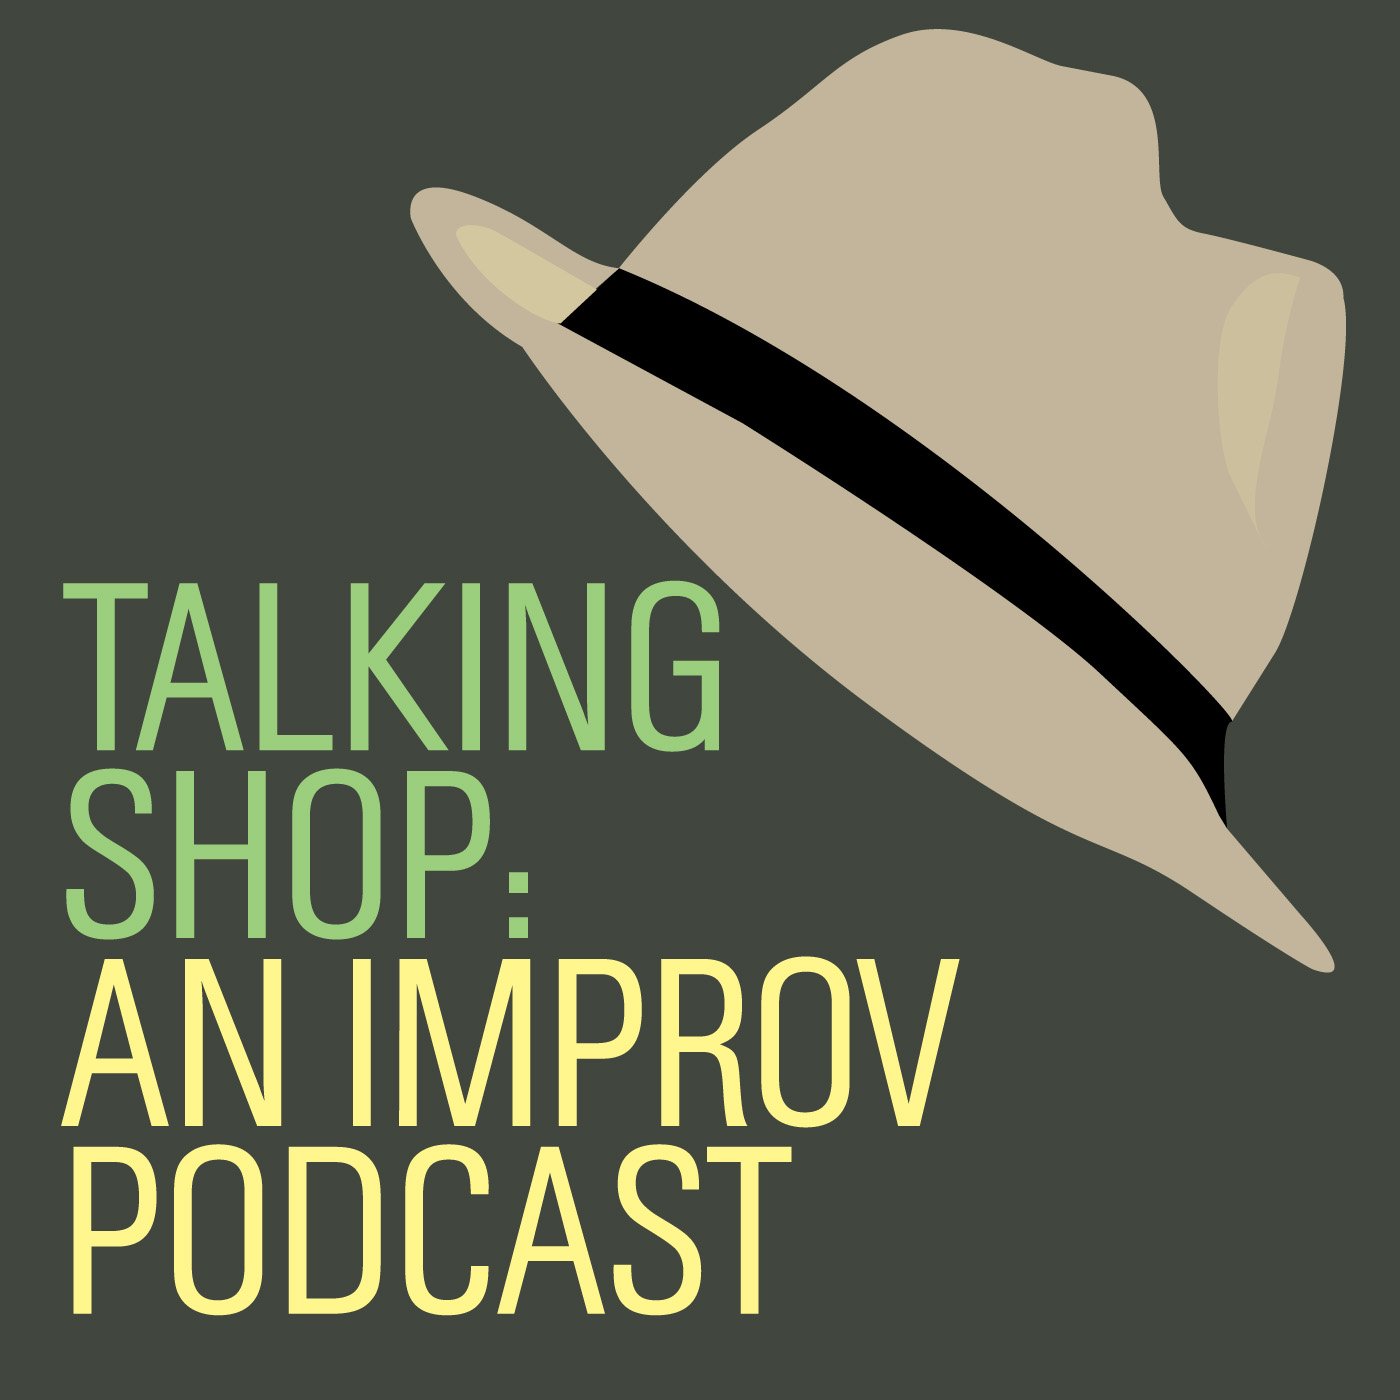 019 - The Bristol Improv Theater - On community focus, improv as a process, and balancing strong offers with discovery